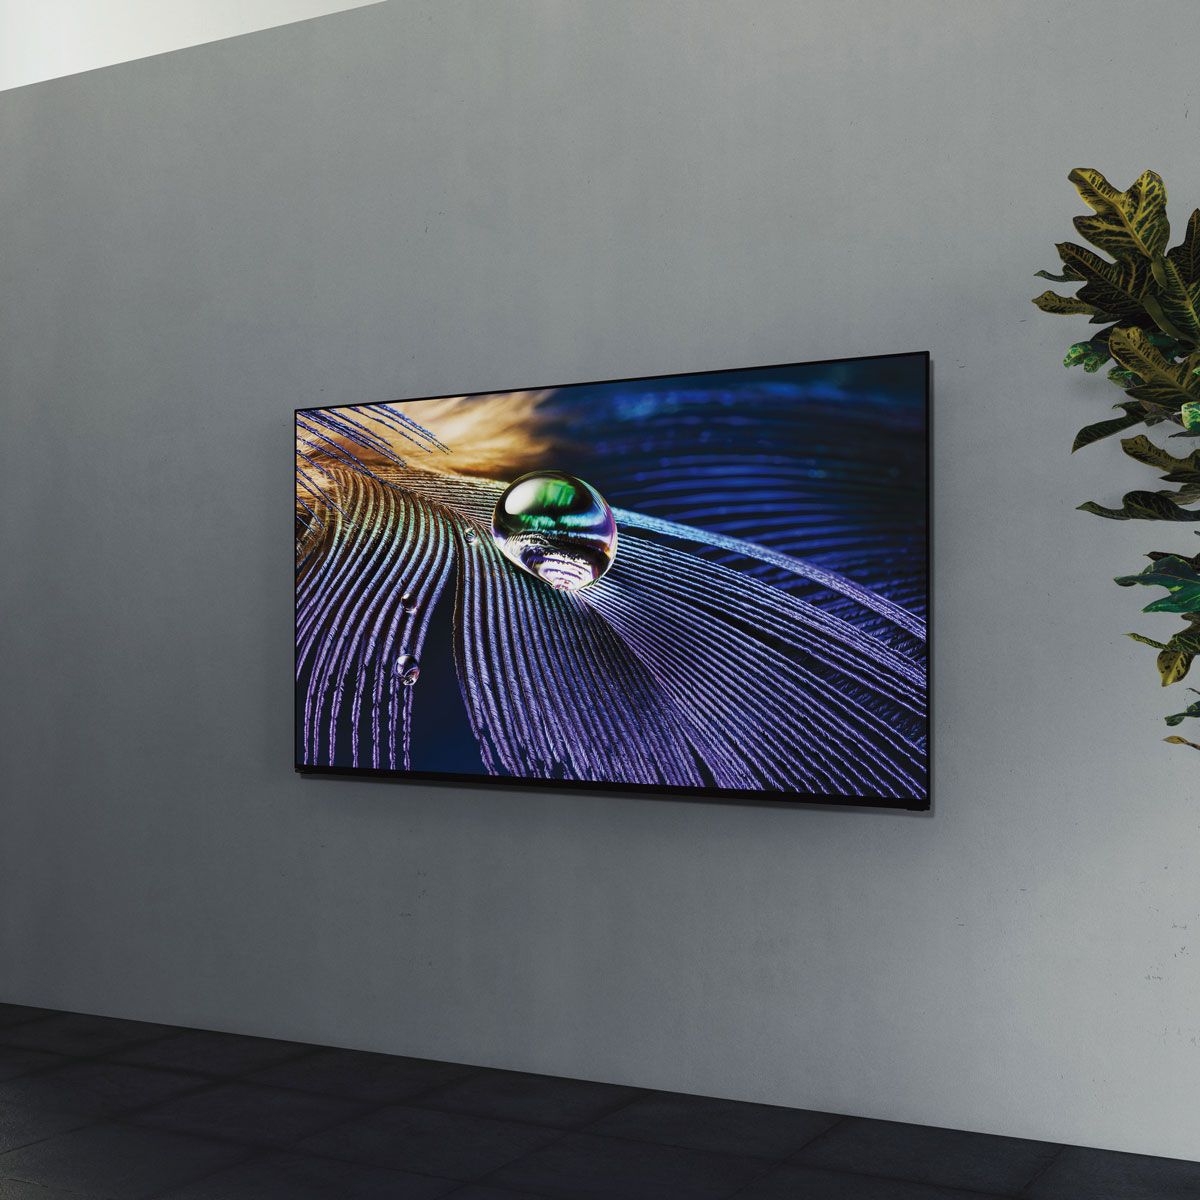 Sony A90J Television Mounted on Wall